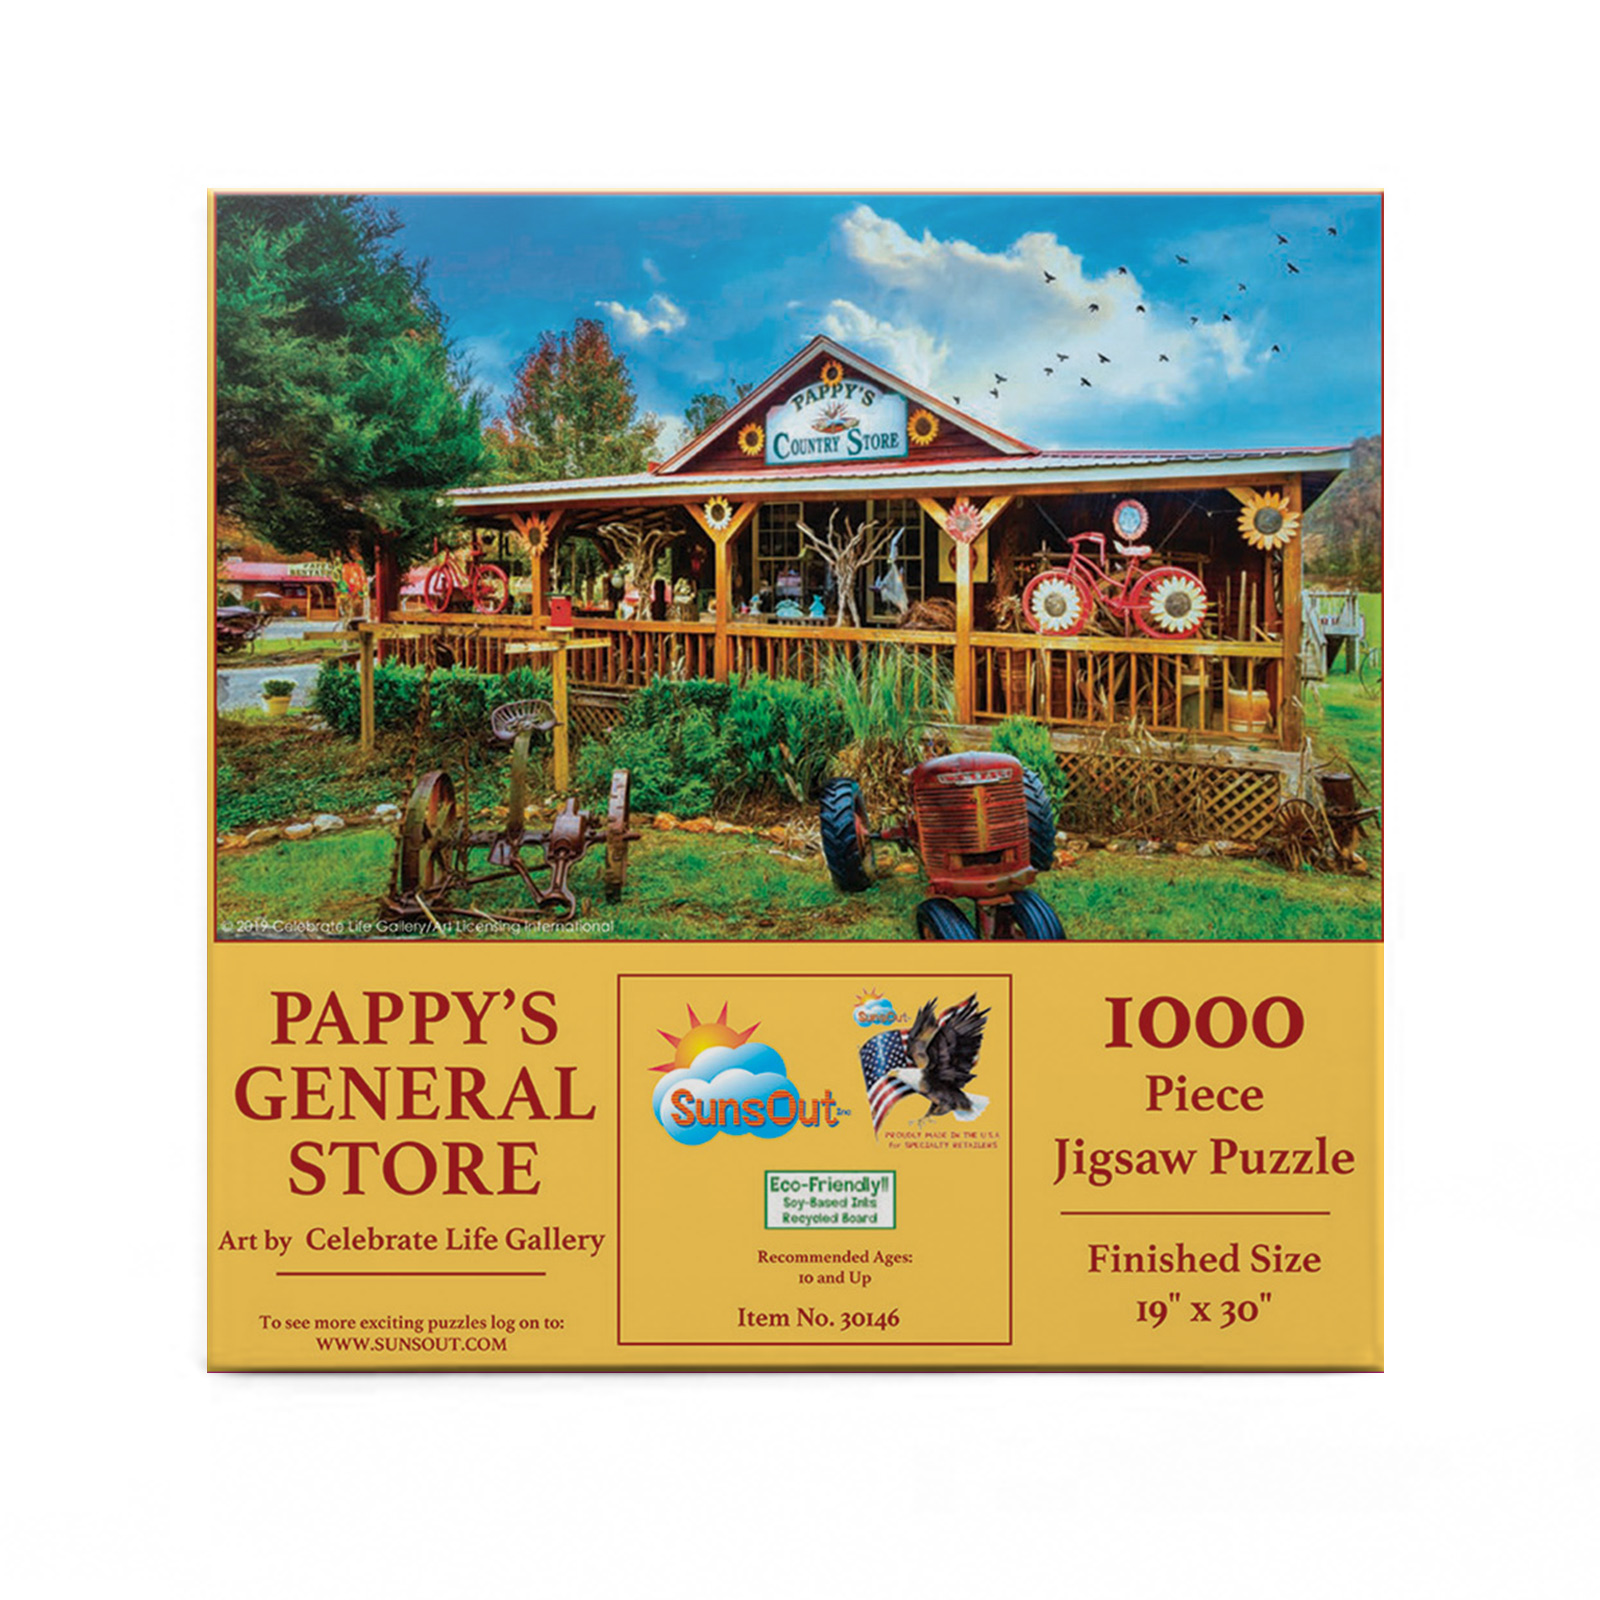 Pappy's General Store